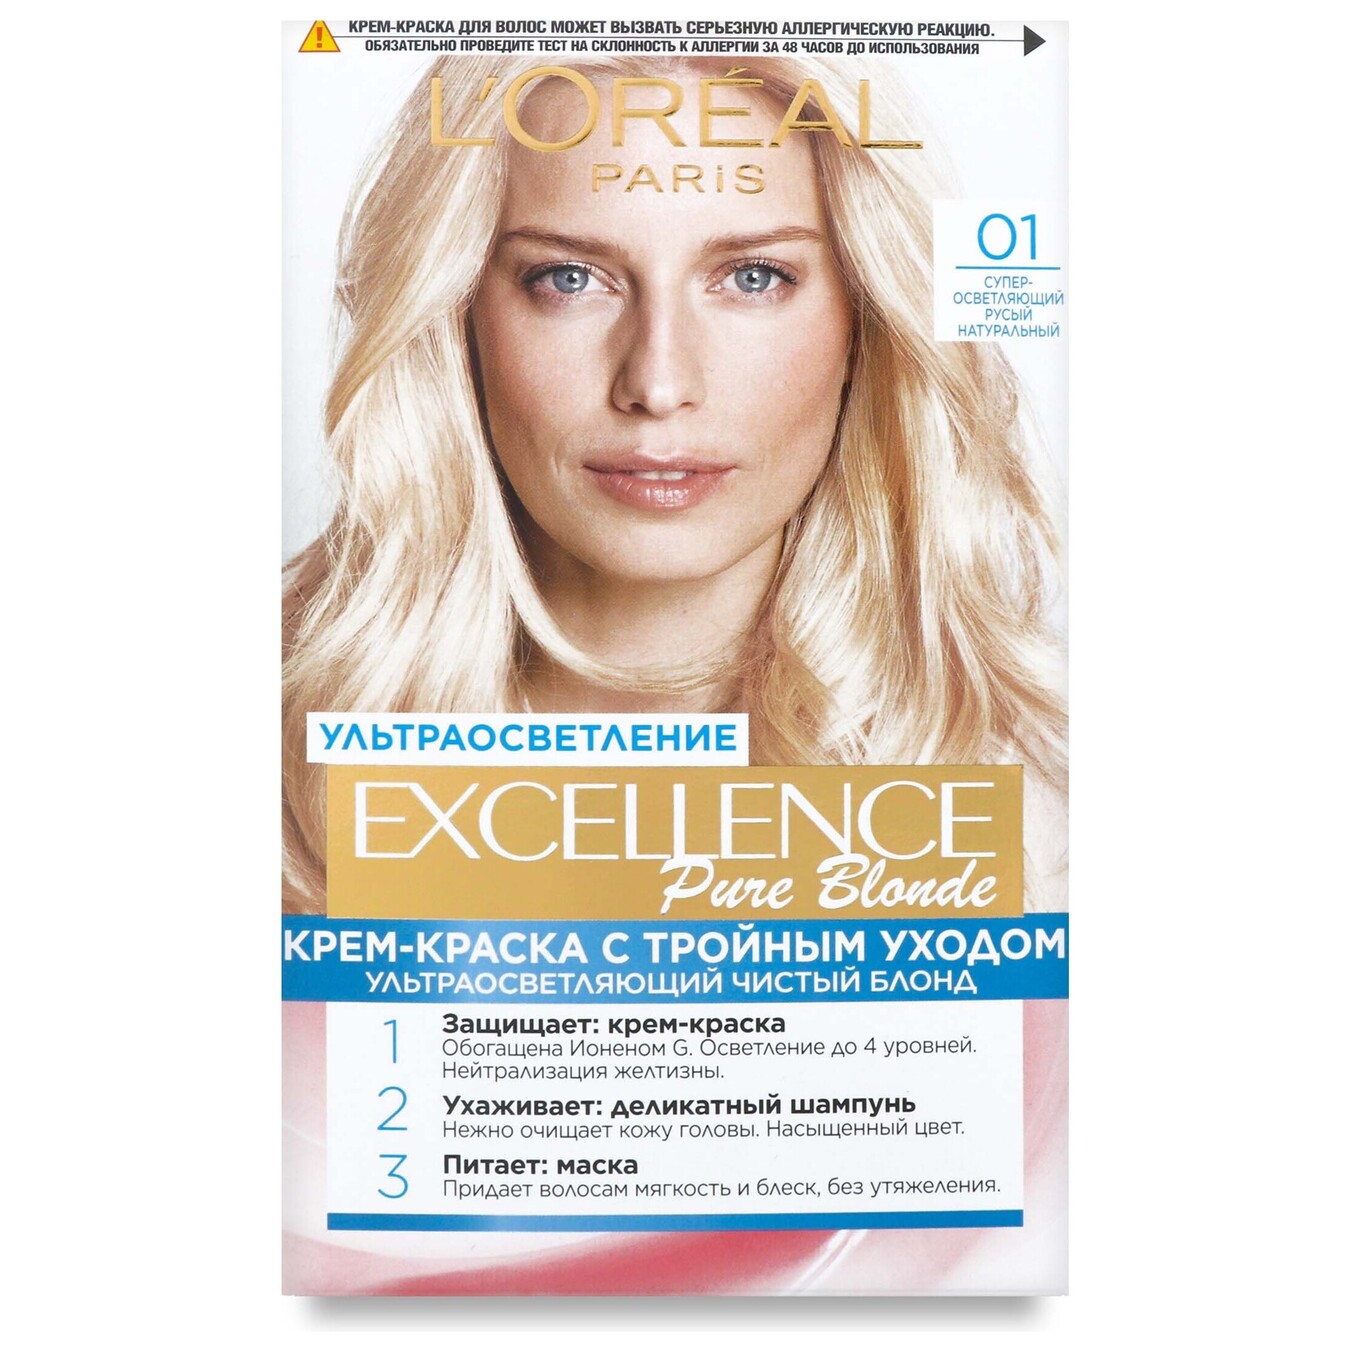 Hair dye Loreal Excellence blonde 01 natural blonde